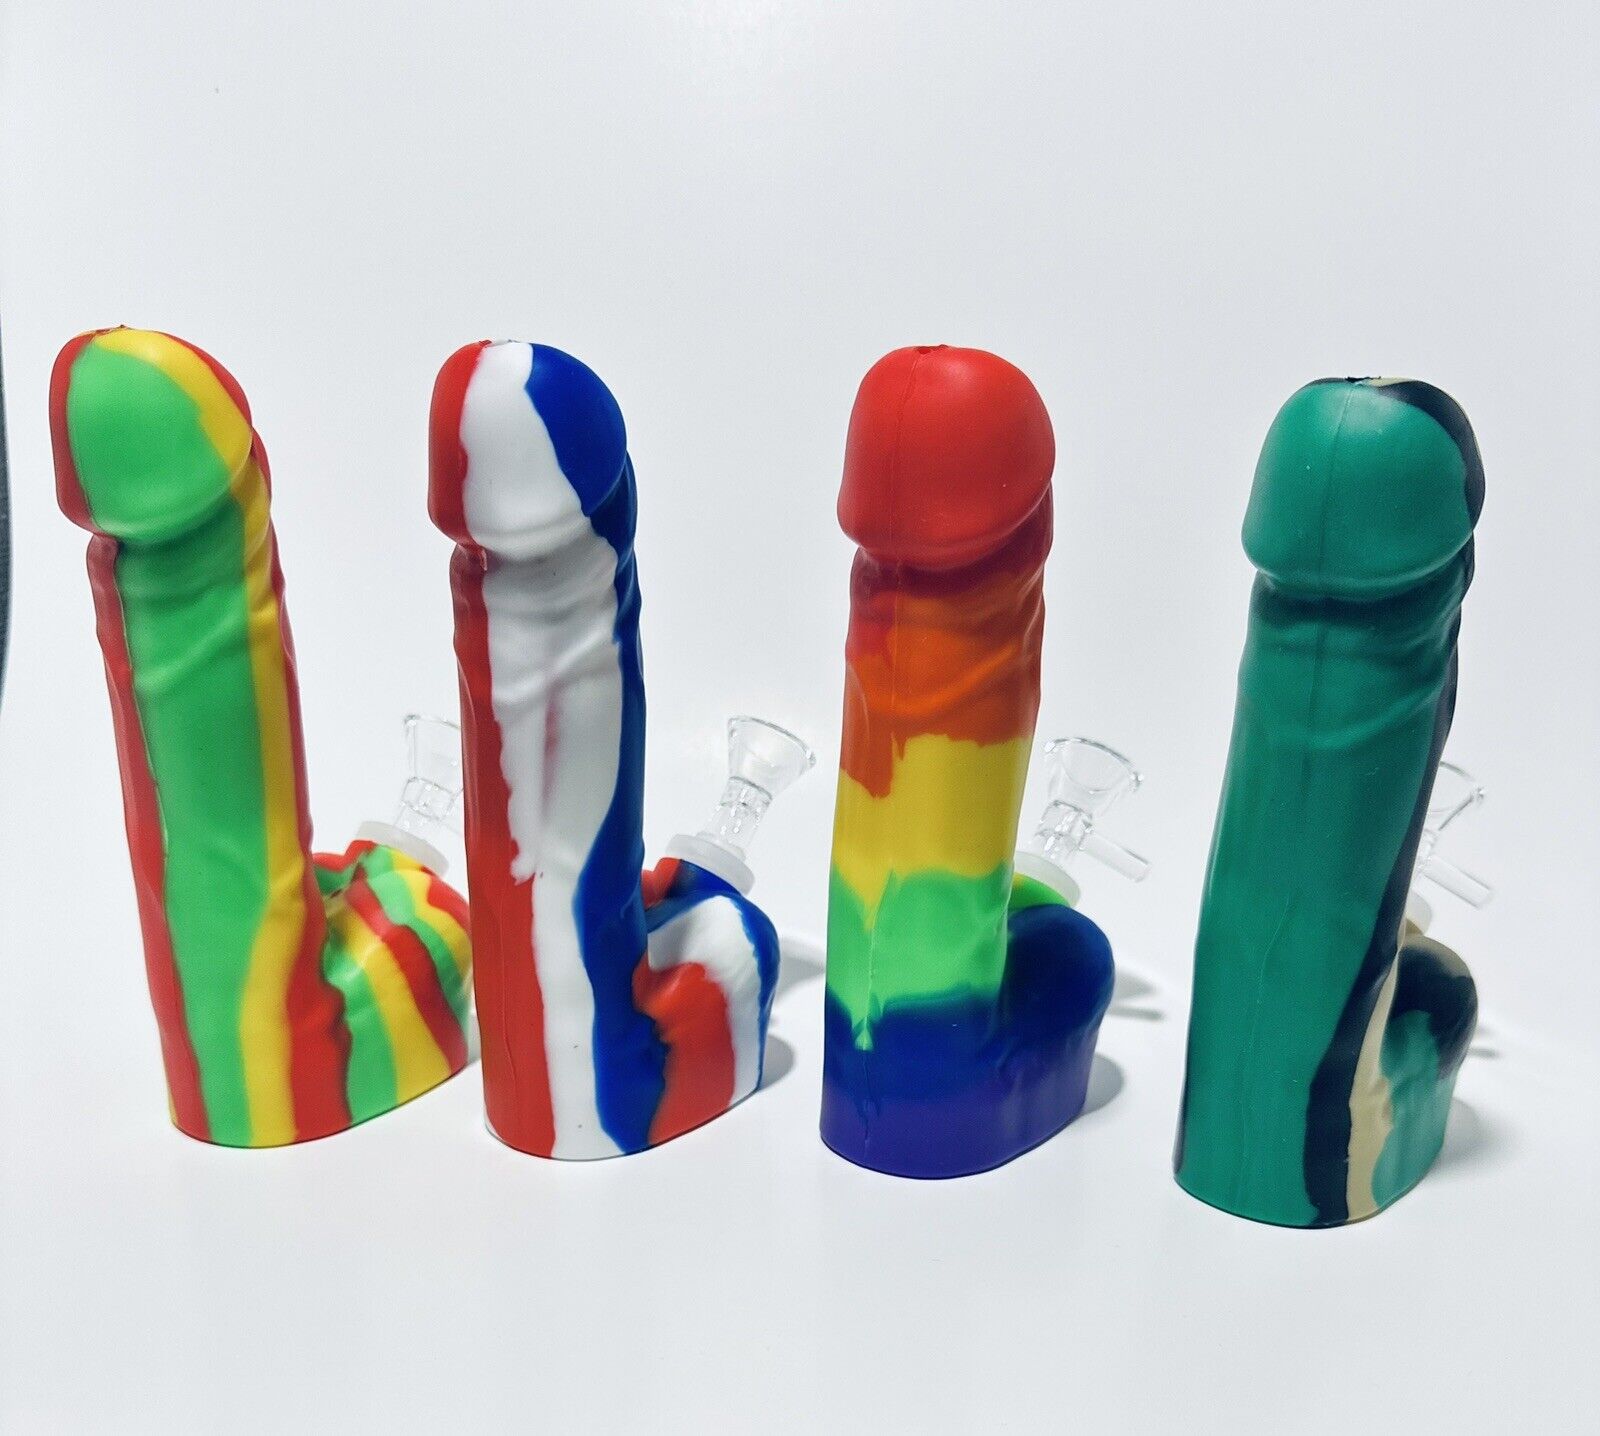 Uniqsmokes Silicone Penis Shaped Water Pipe with Ice Catcher, 4.25 Inches, Clear